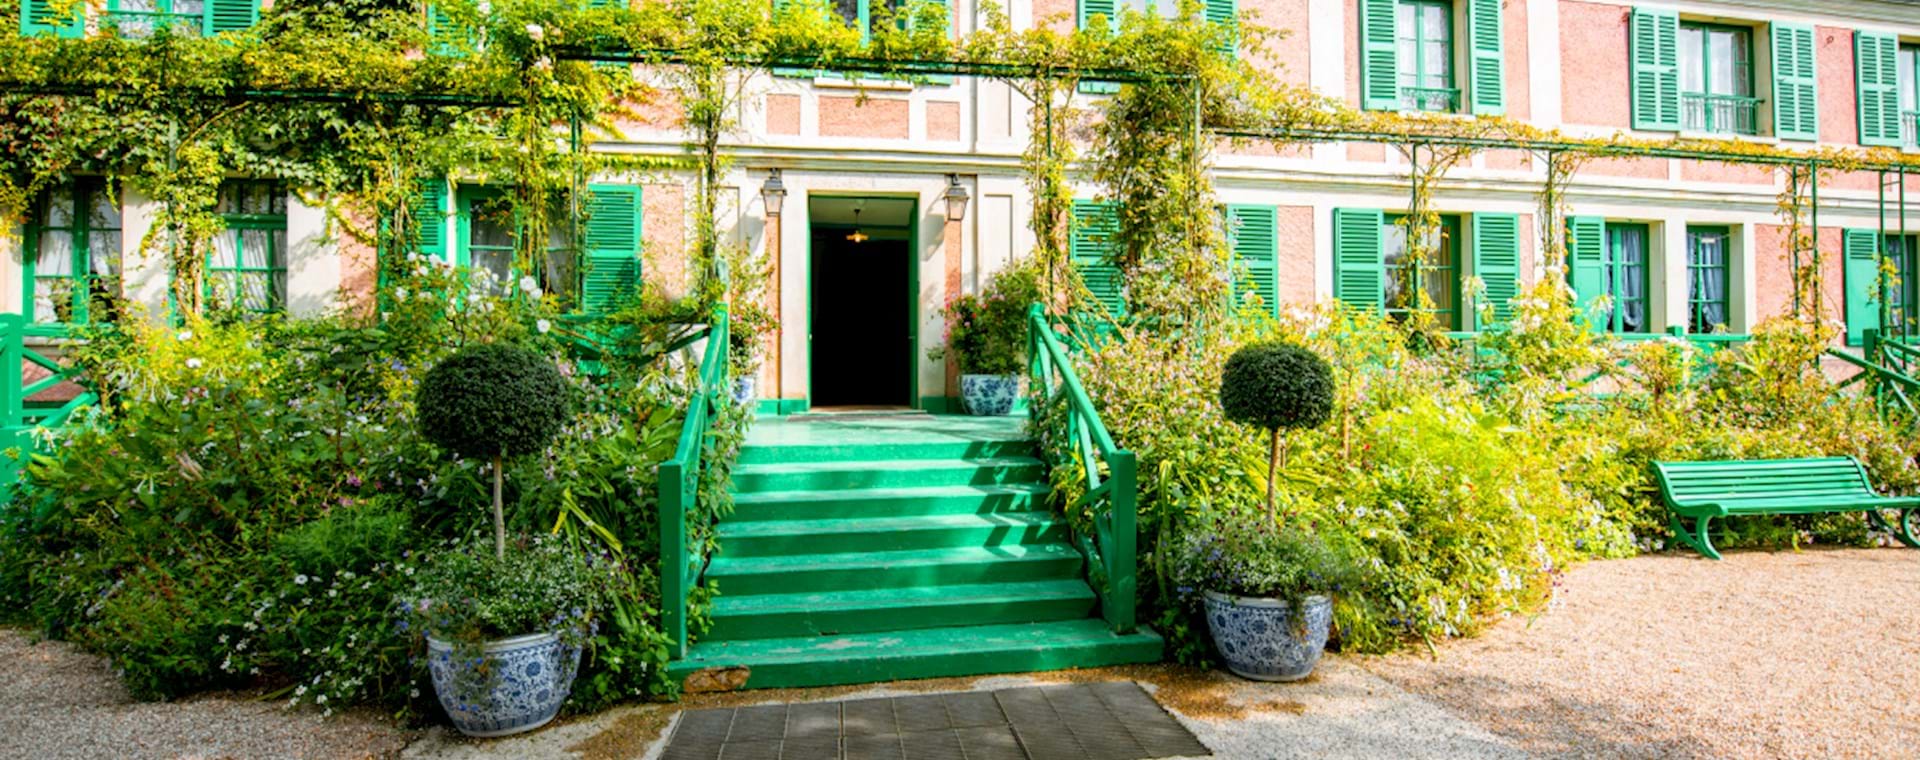 House of Monet in Giverny